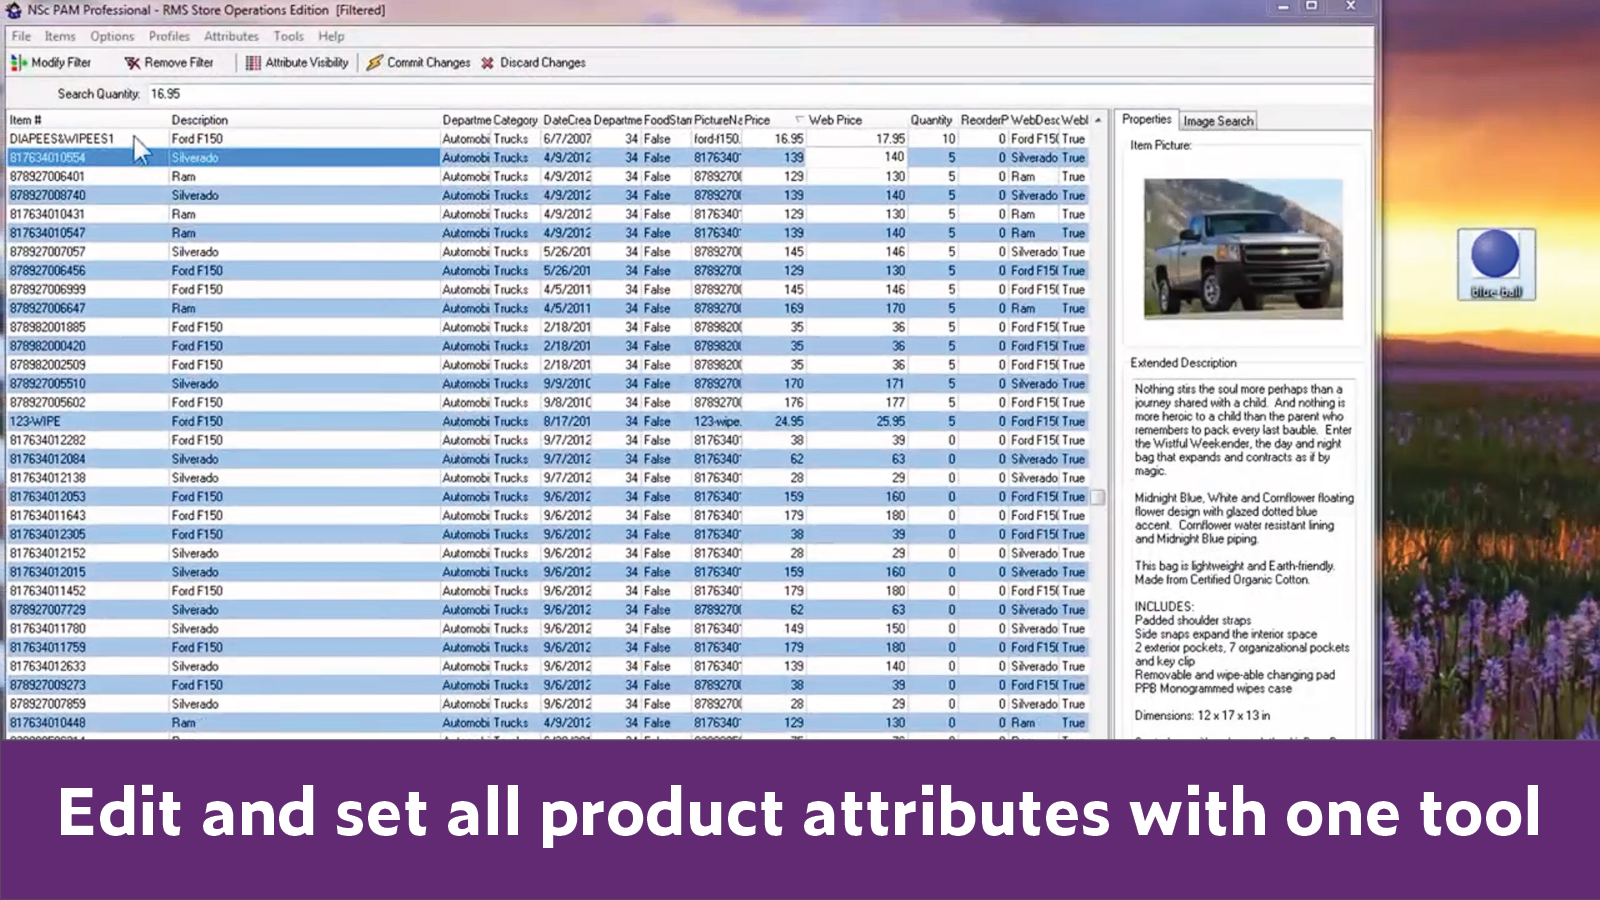 Manage every aspect of your products with the Product Attribute Manager (PAM).